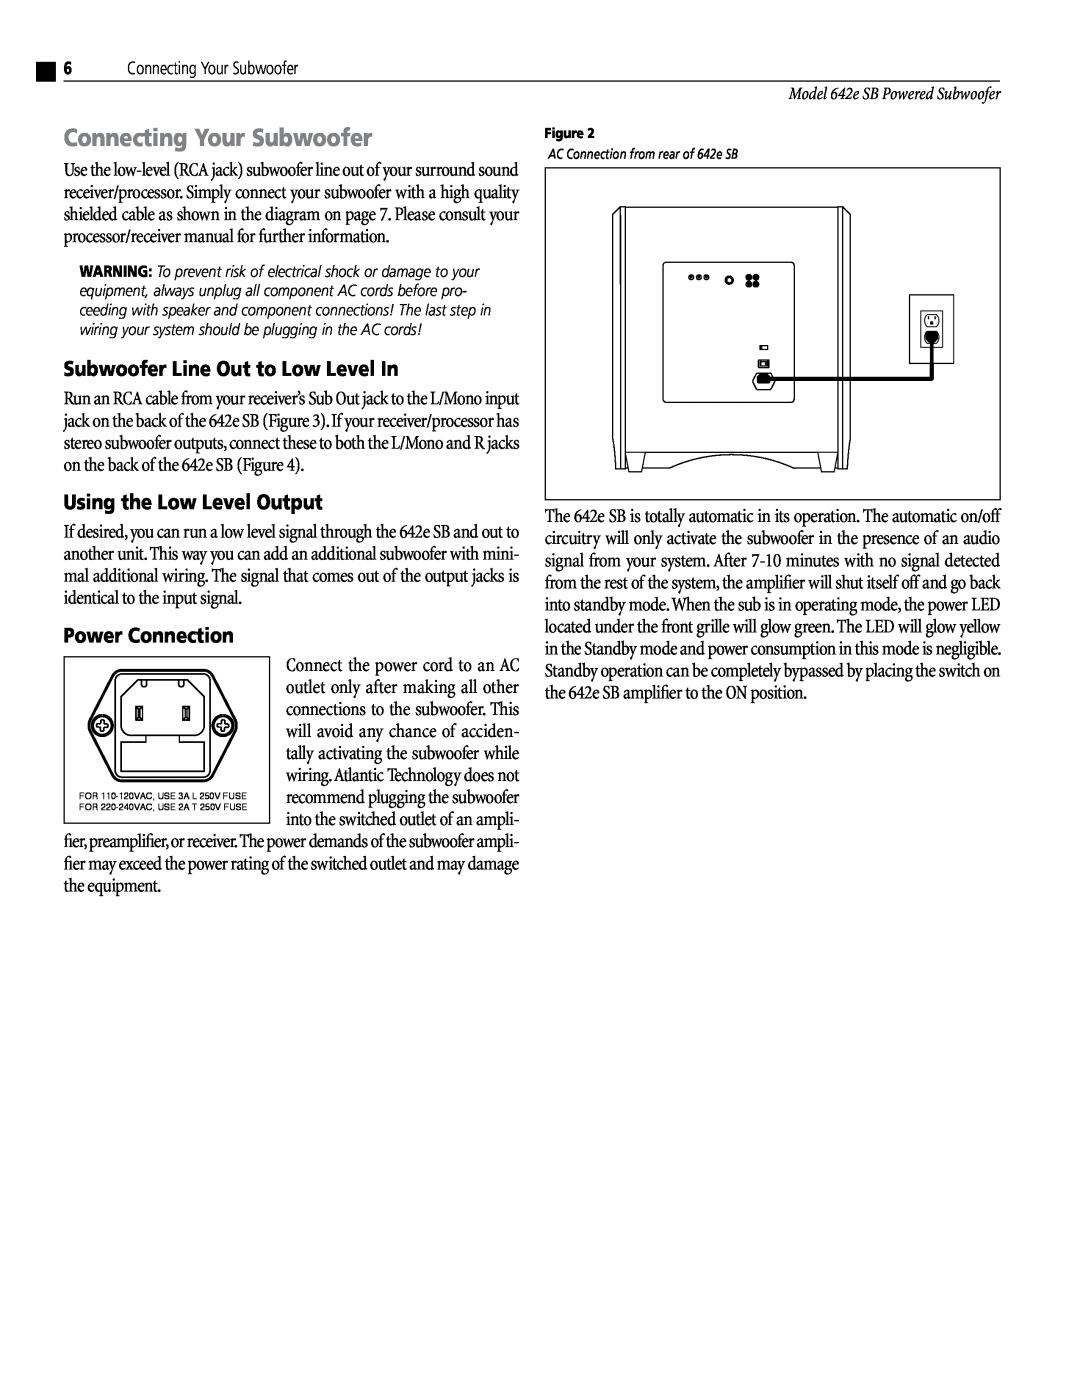 Atlantic Technology instruction manual Model 642e SB Powered Subwoofer, AC Connection from rear of 642e SB 